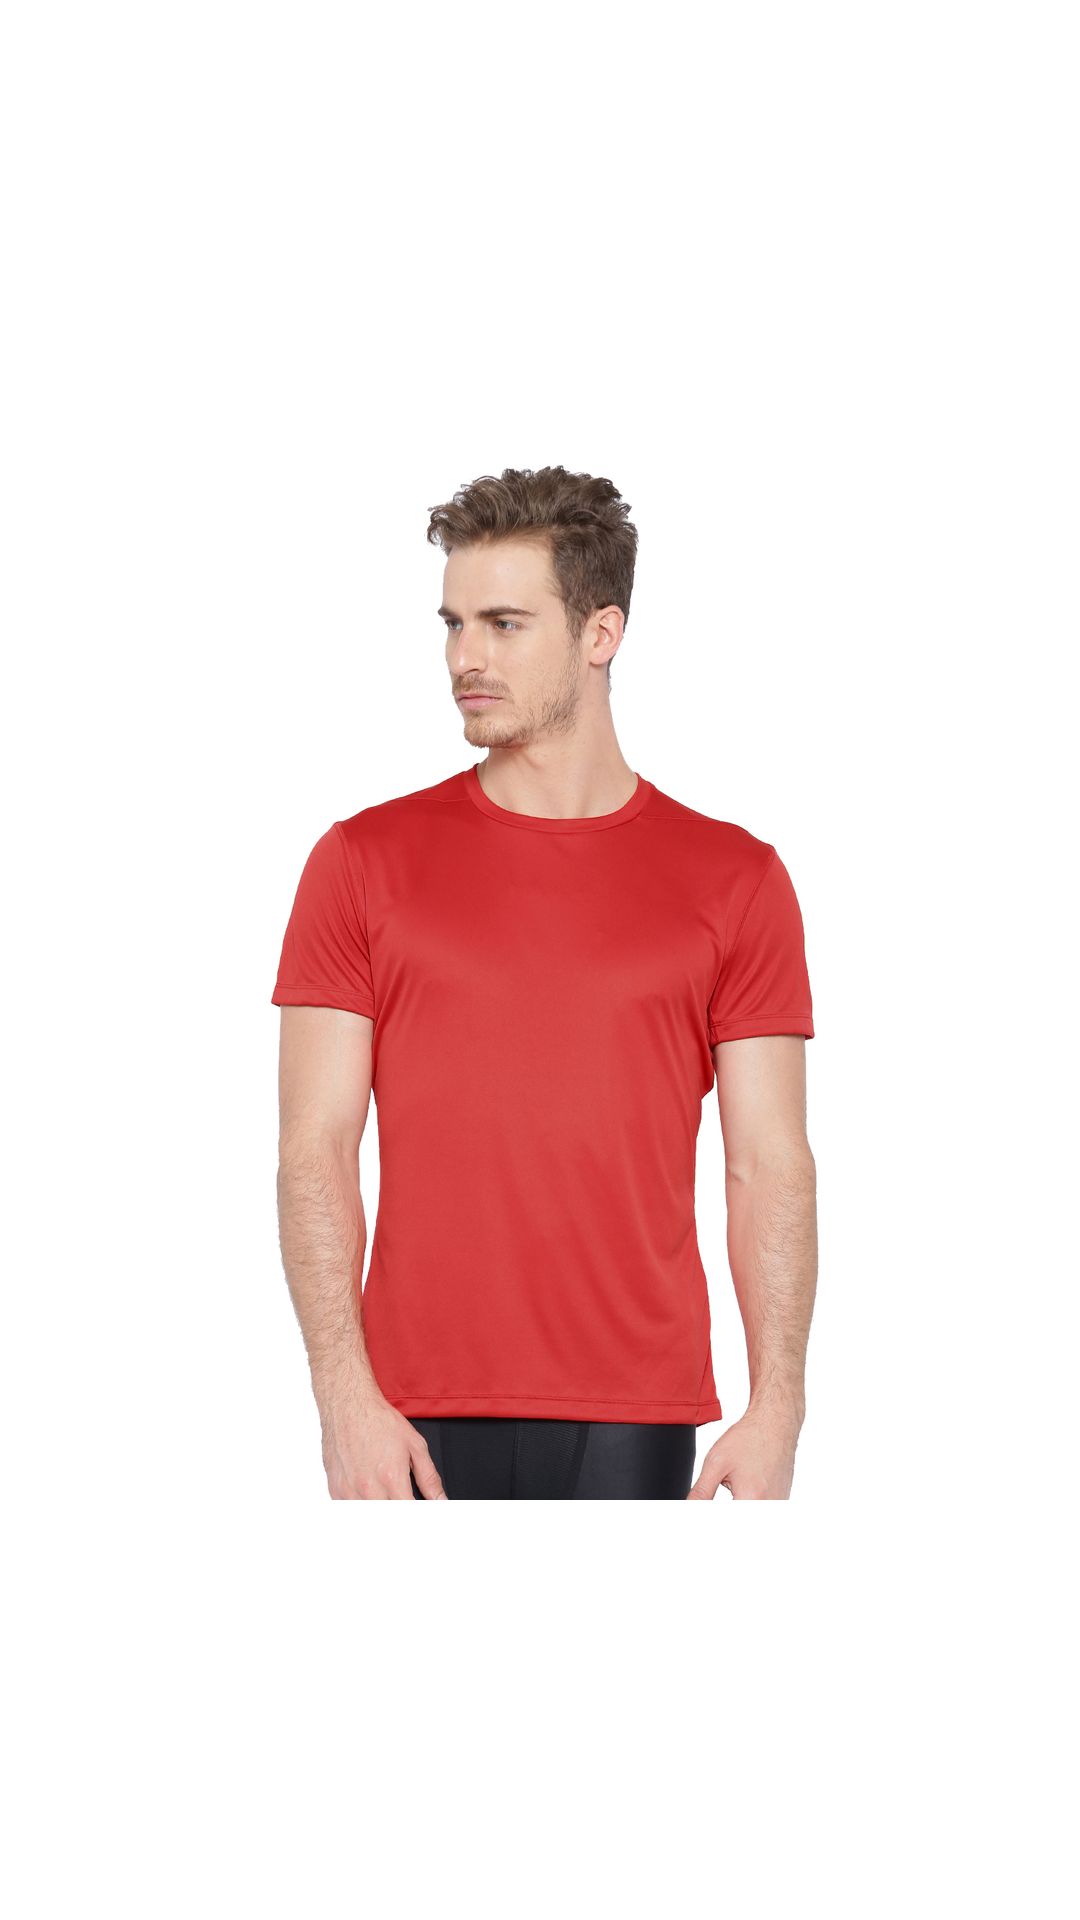 Buy Concepts Red Polyester Dri-Fit T-Shirt Online @ ₹249 from ShopClues